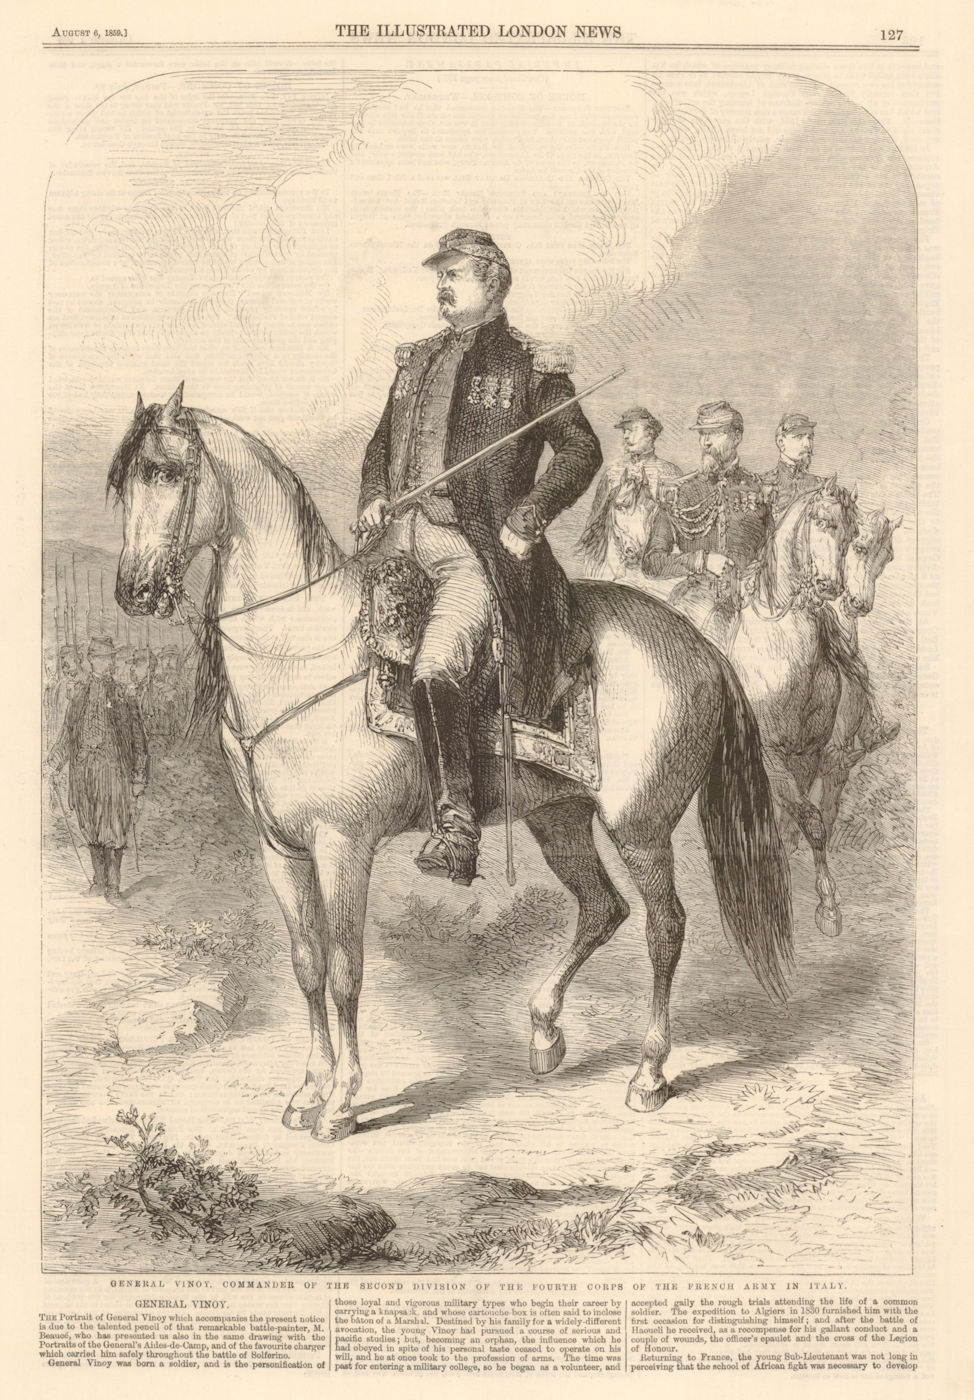 Associate Product General Vinoy Commander 2nd division 4th corps French Army in Italy 1859 print